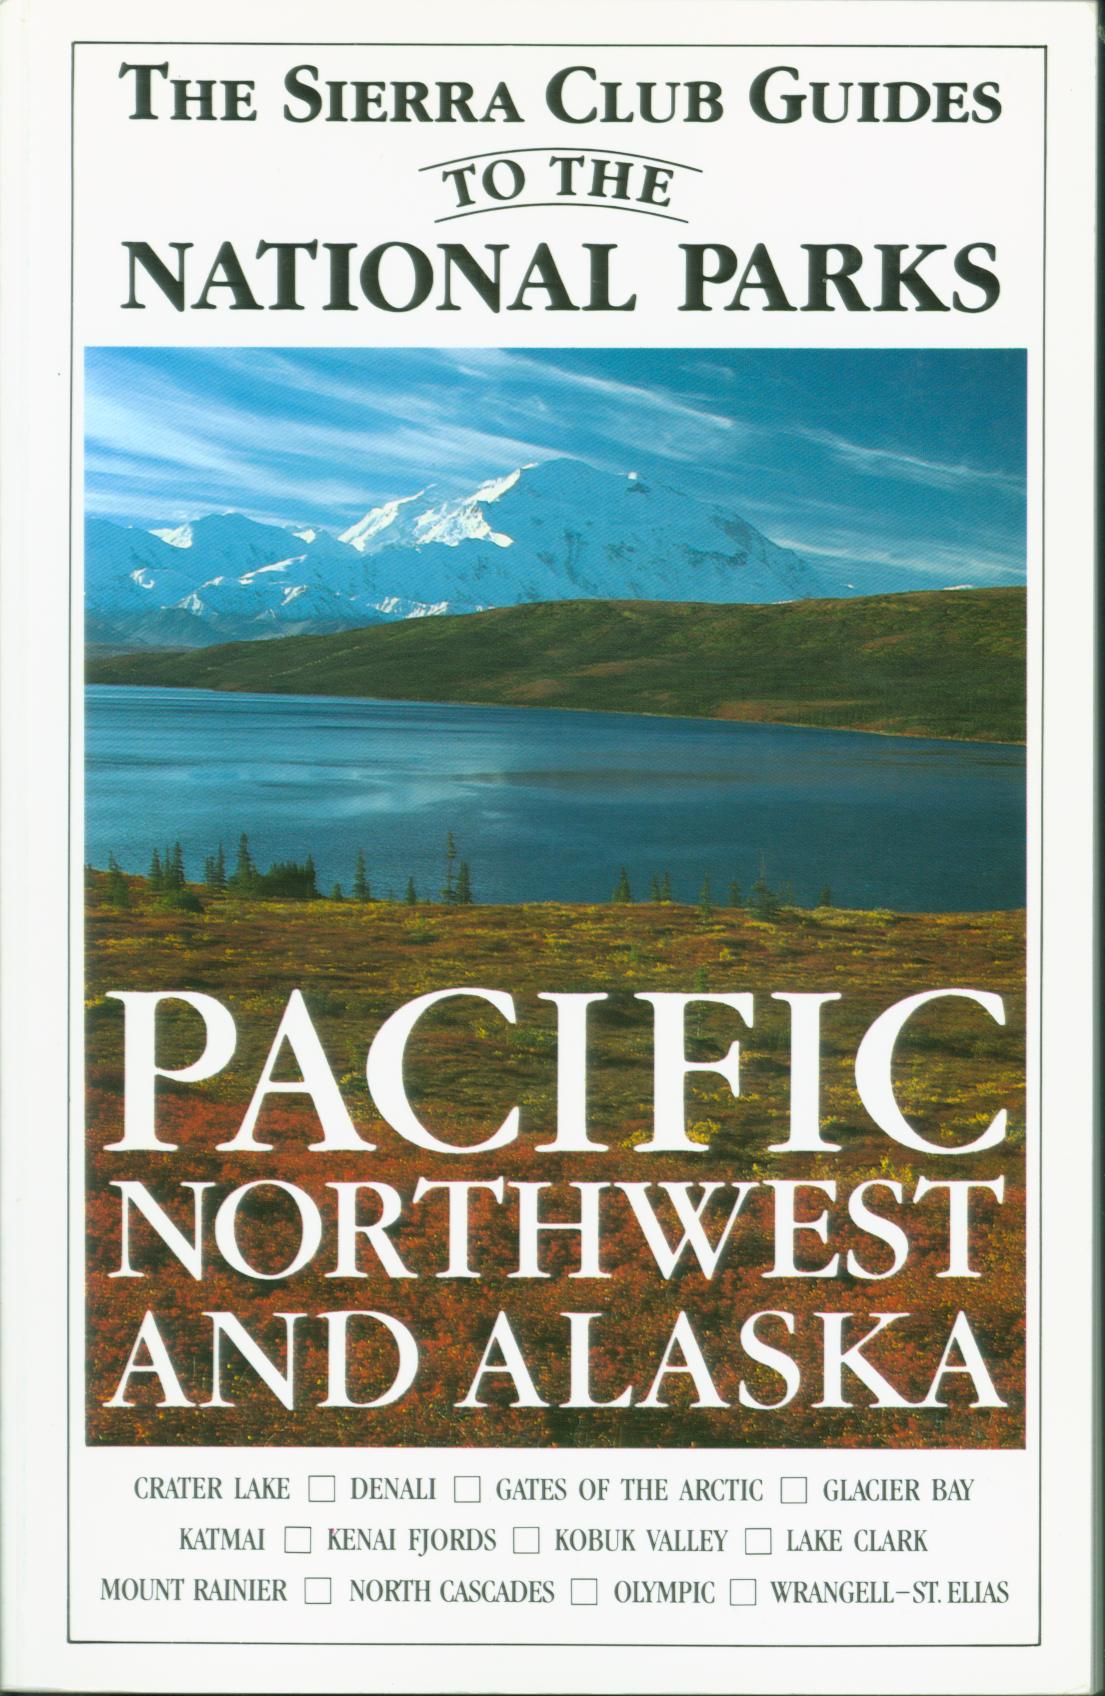 THE SIERRA CLUB GUIDES TO THE NATIONAL PARKS --PACIFIC NORTHWEST AND ALASKA. 